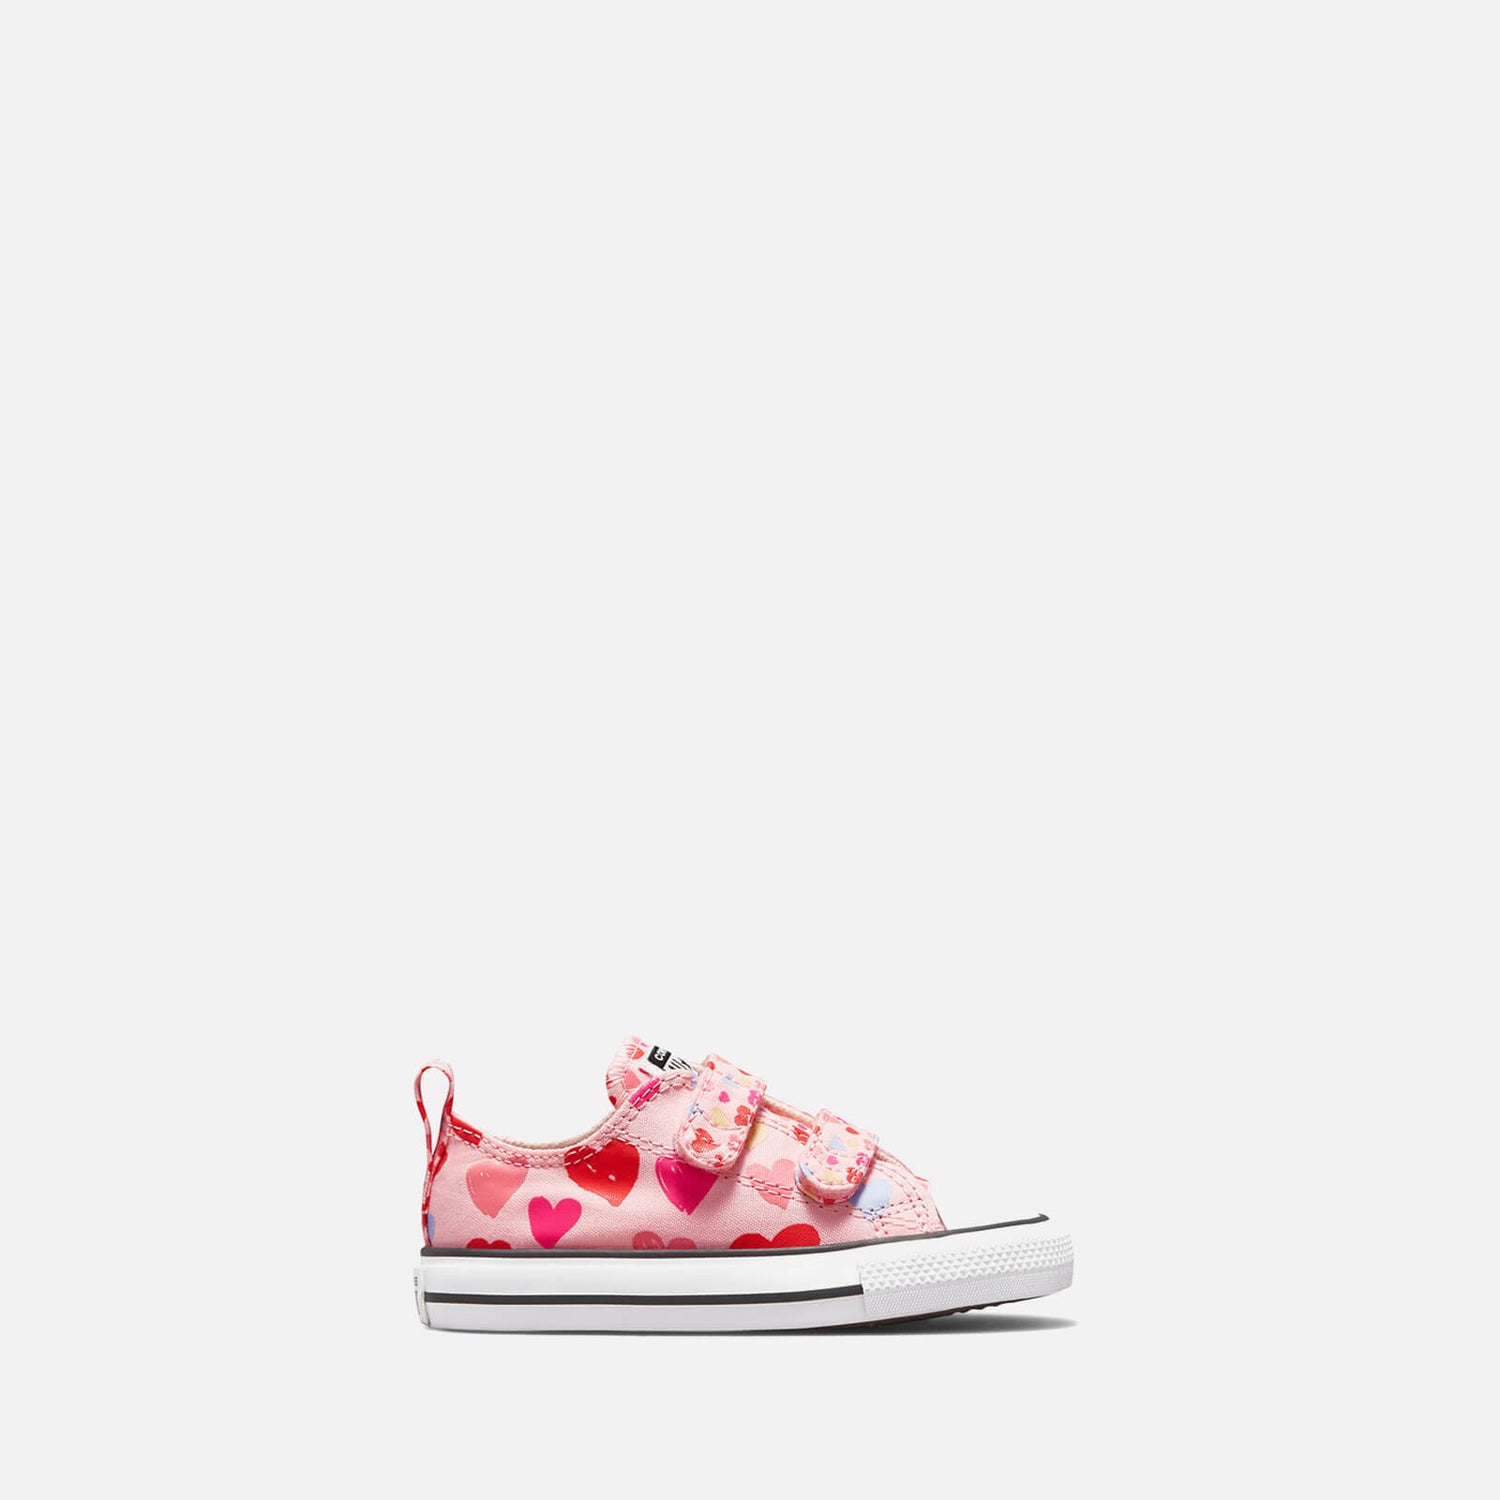 Converse Toddlers' Chuck Taylor All Star 2V Heart Print Trainers - Storm Pink/Natural Ivory